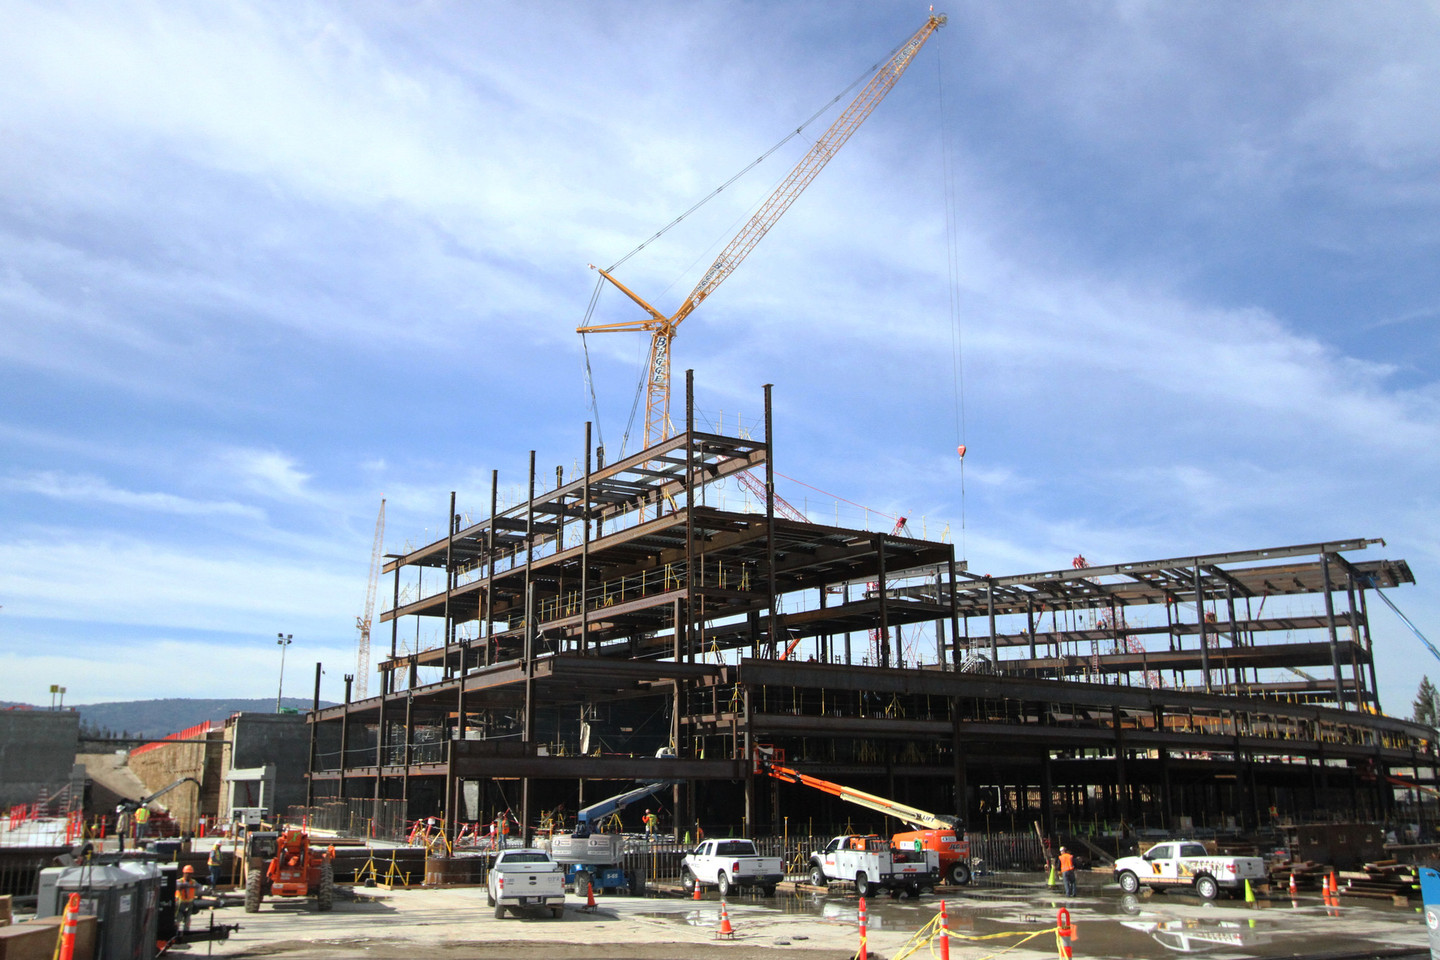 The main office will be a large circular building and is being constructed with concrete pieces. (Anya Schultz/KQED)